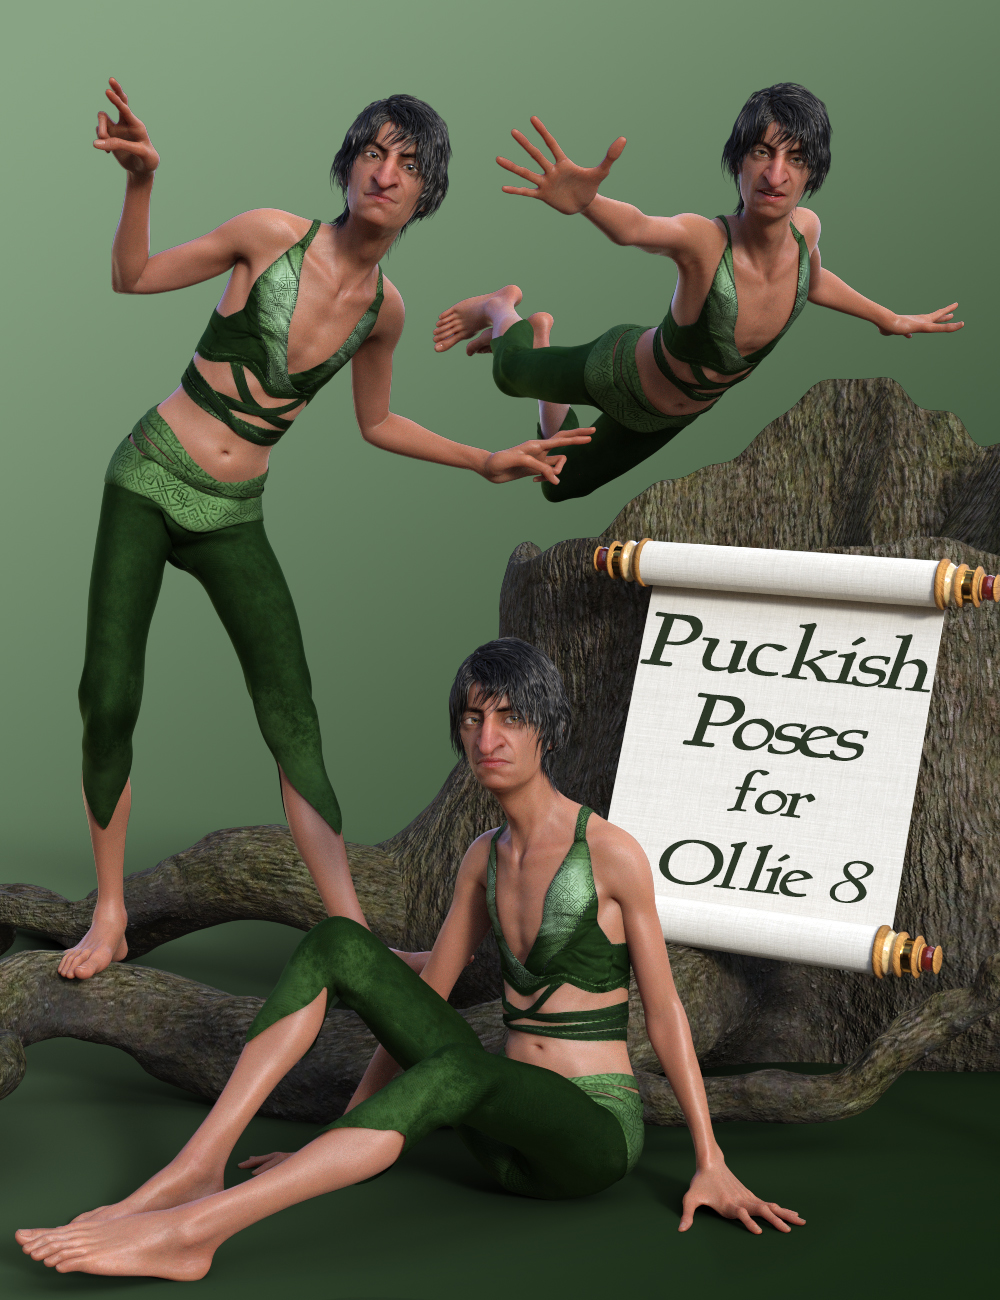 Puckish Poses for Ollie 8 by: Quixotry, 3D Models by Daz 3D